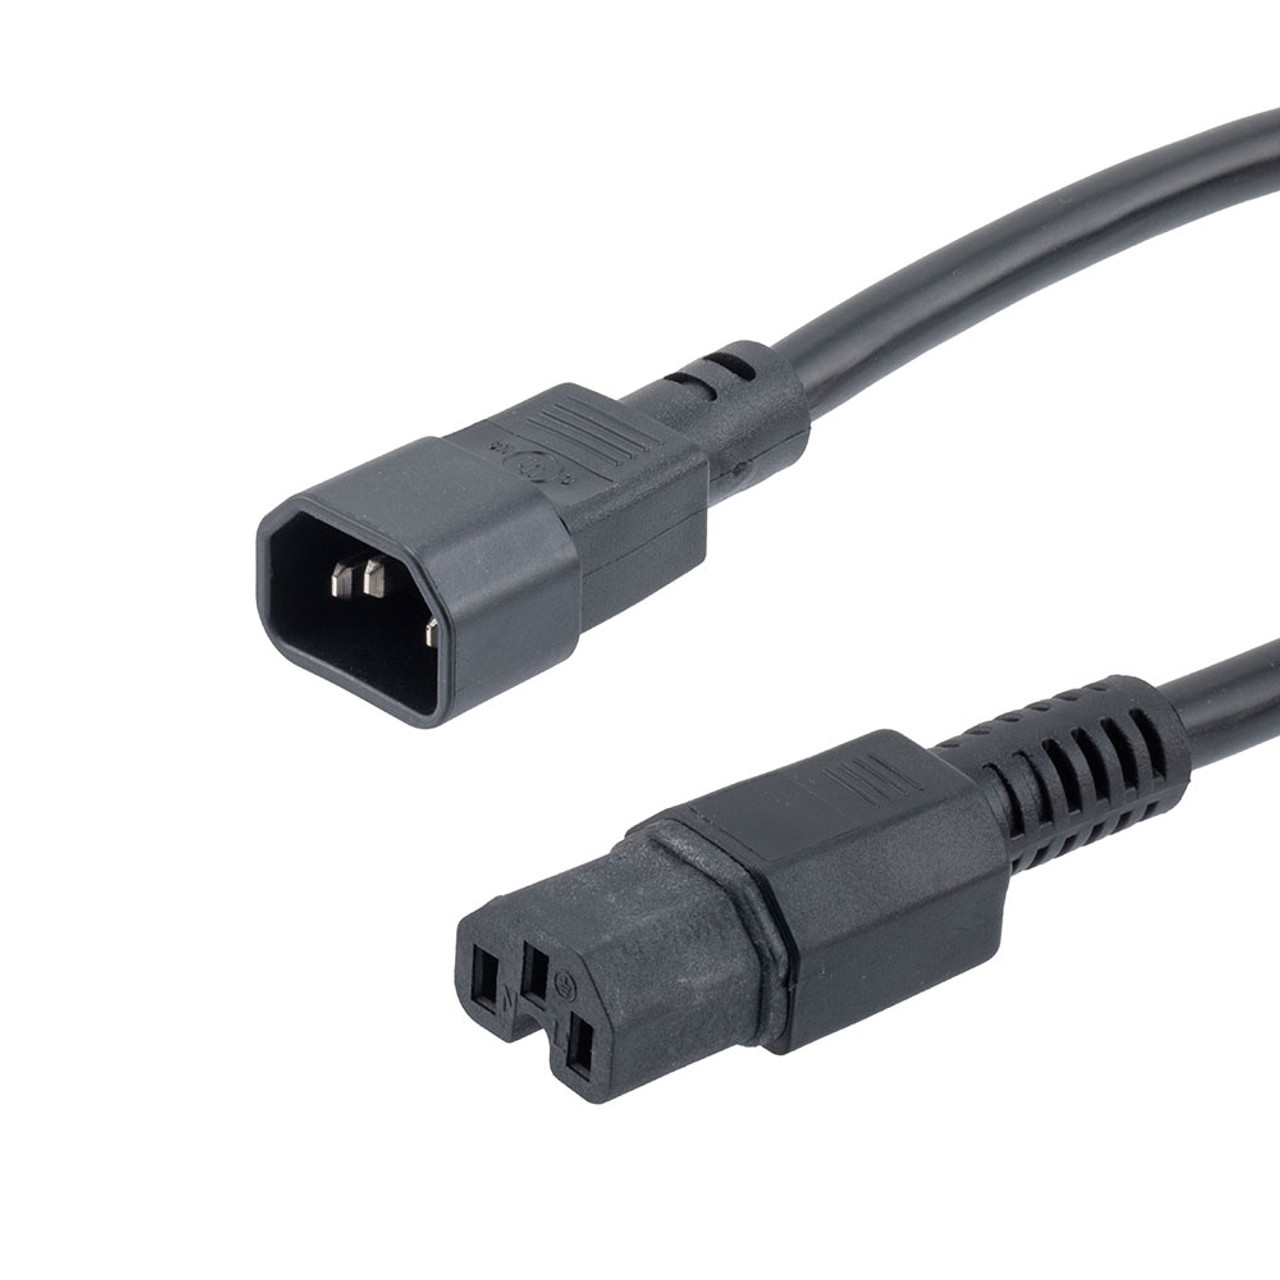 High Temp Power Cord, C14 to IEC C15, 15 A, 6 ft